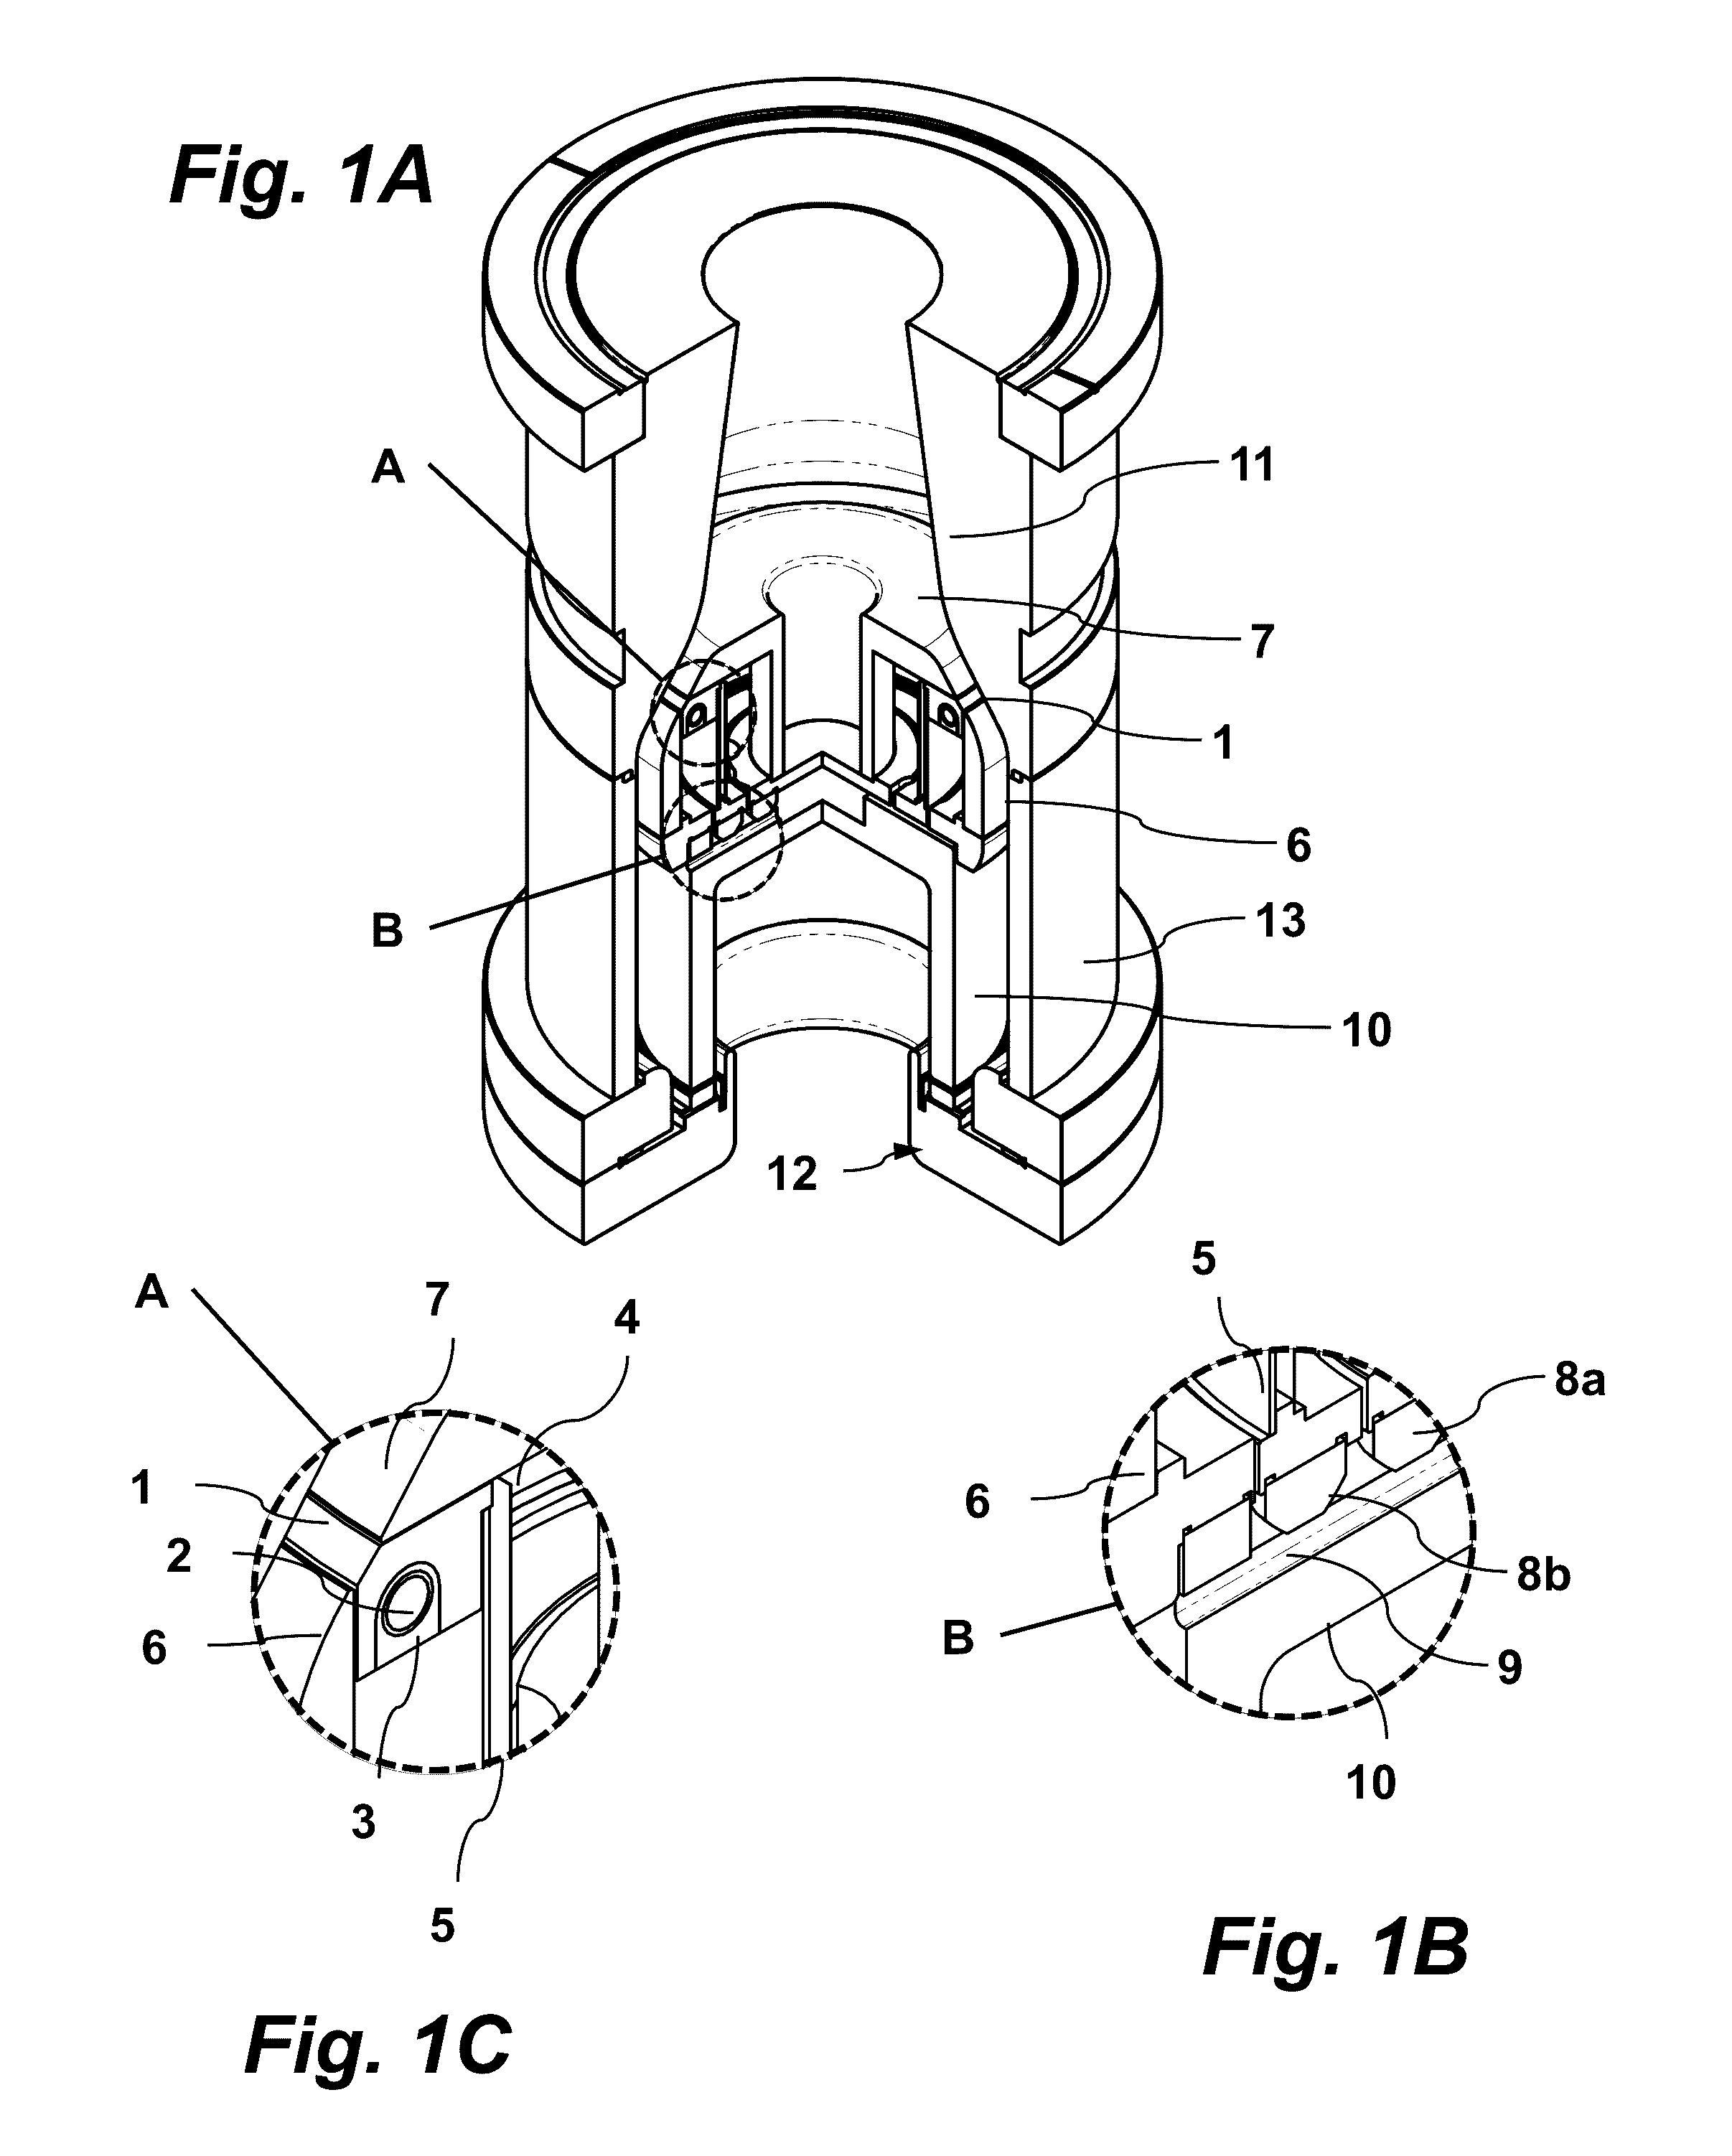 Electron beam gun with kinematic coupling for high power RF vacuum devices